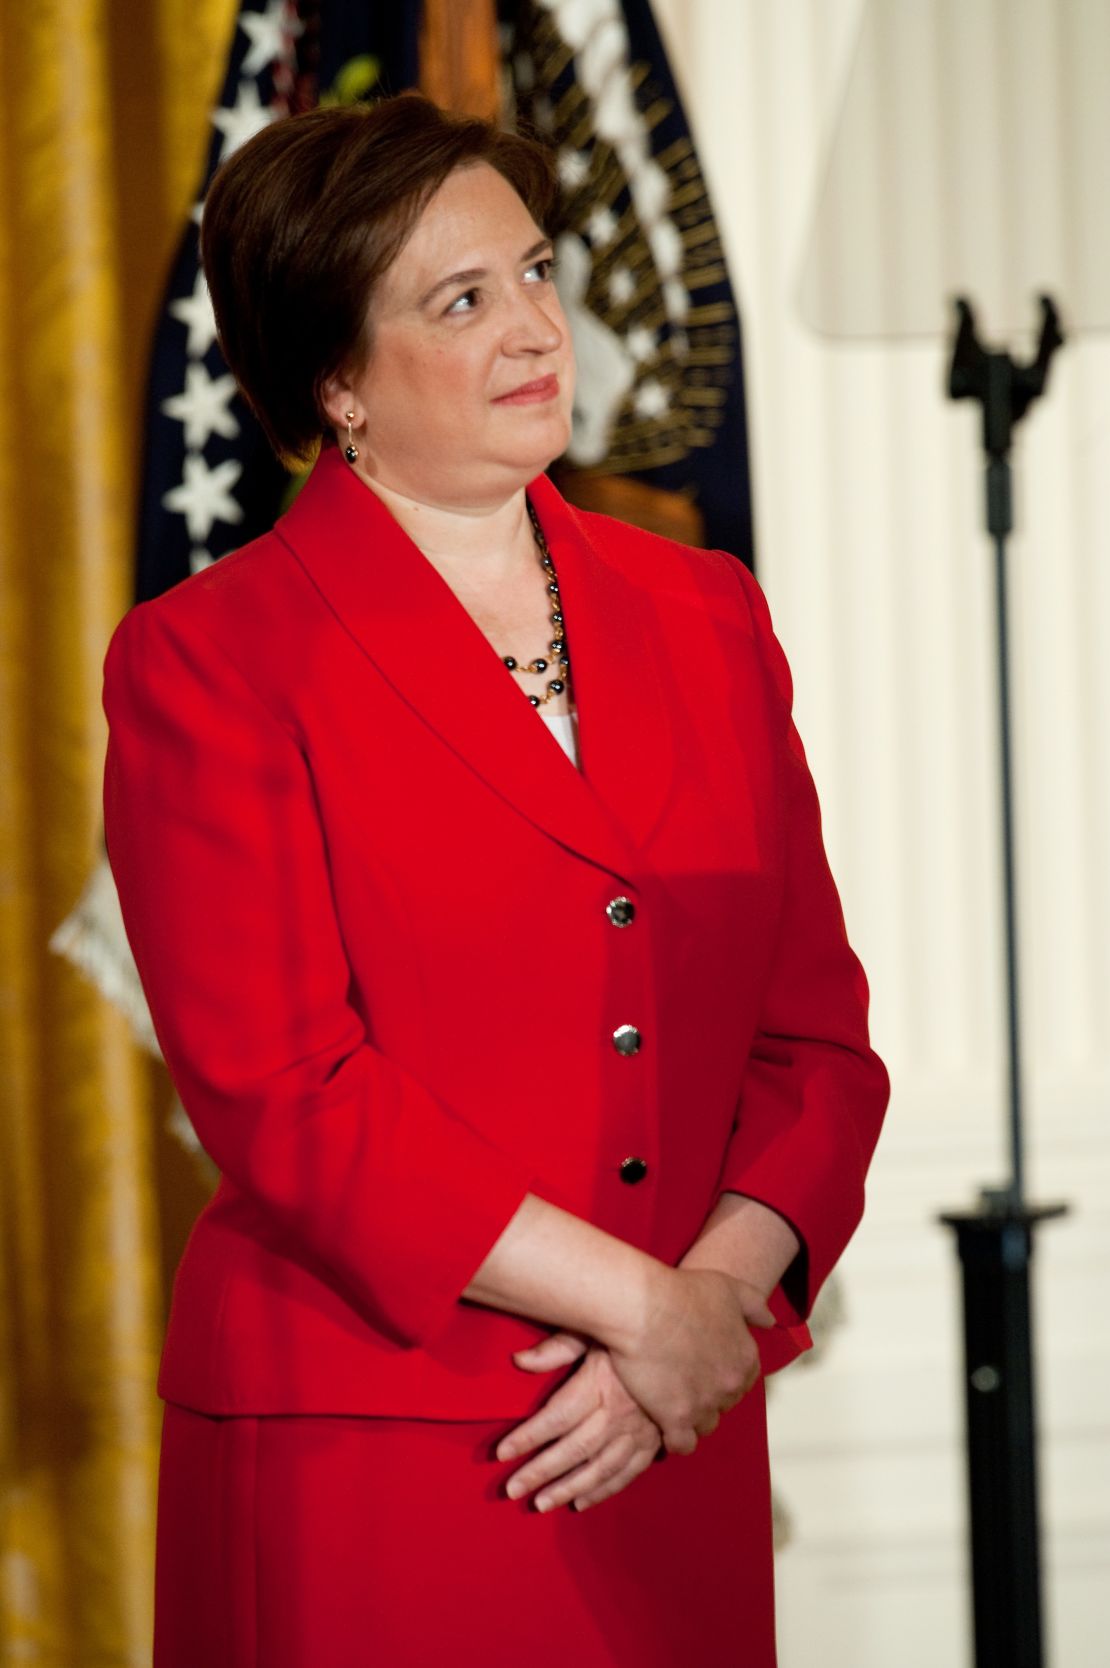 Elena Kagan attends a White House ceremony marking her confirmation to the Supreme Court in August 2010.